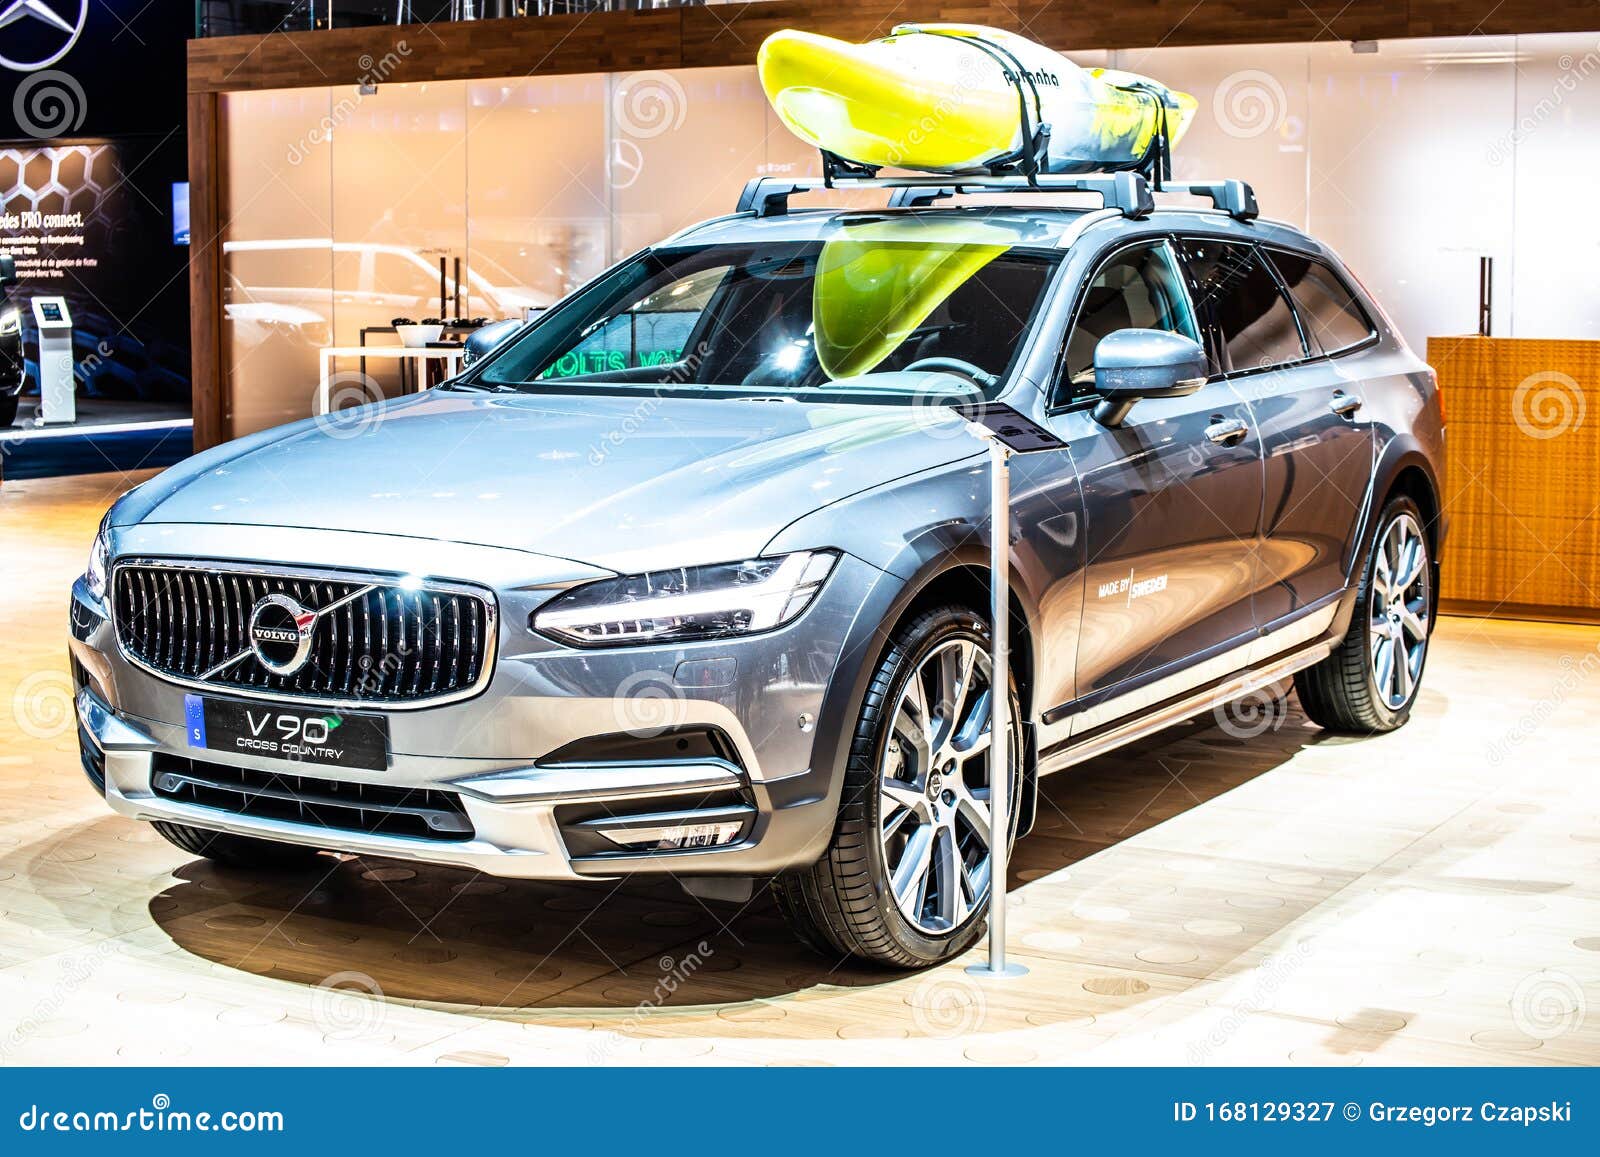 Digitally Electric Volvo V90 Cross Country Shows That (Cool) Station Wagons  Still Matter - autoevolution